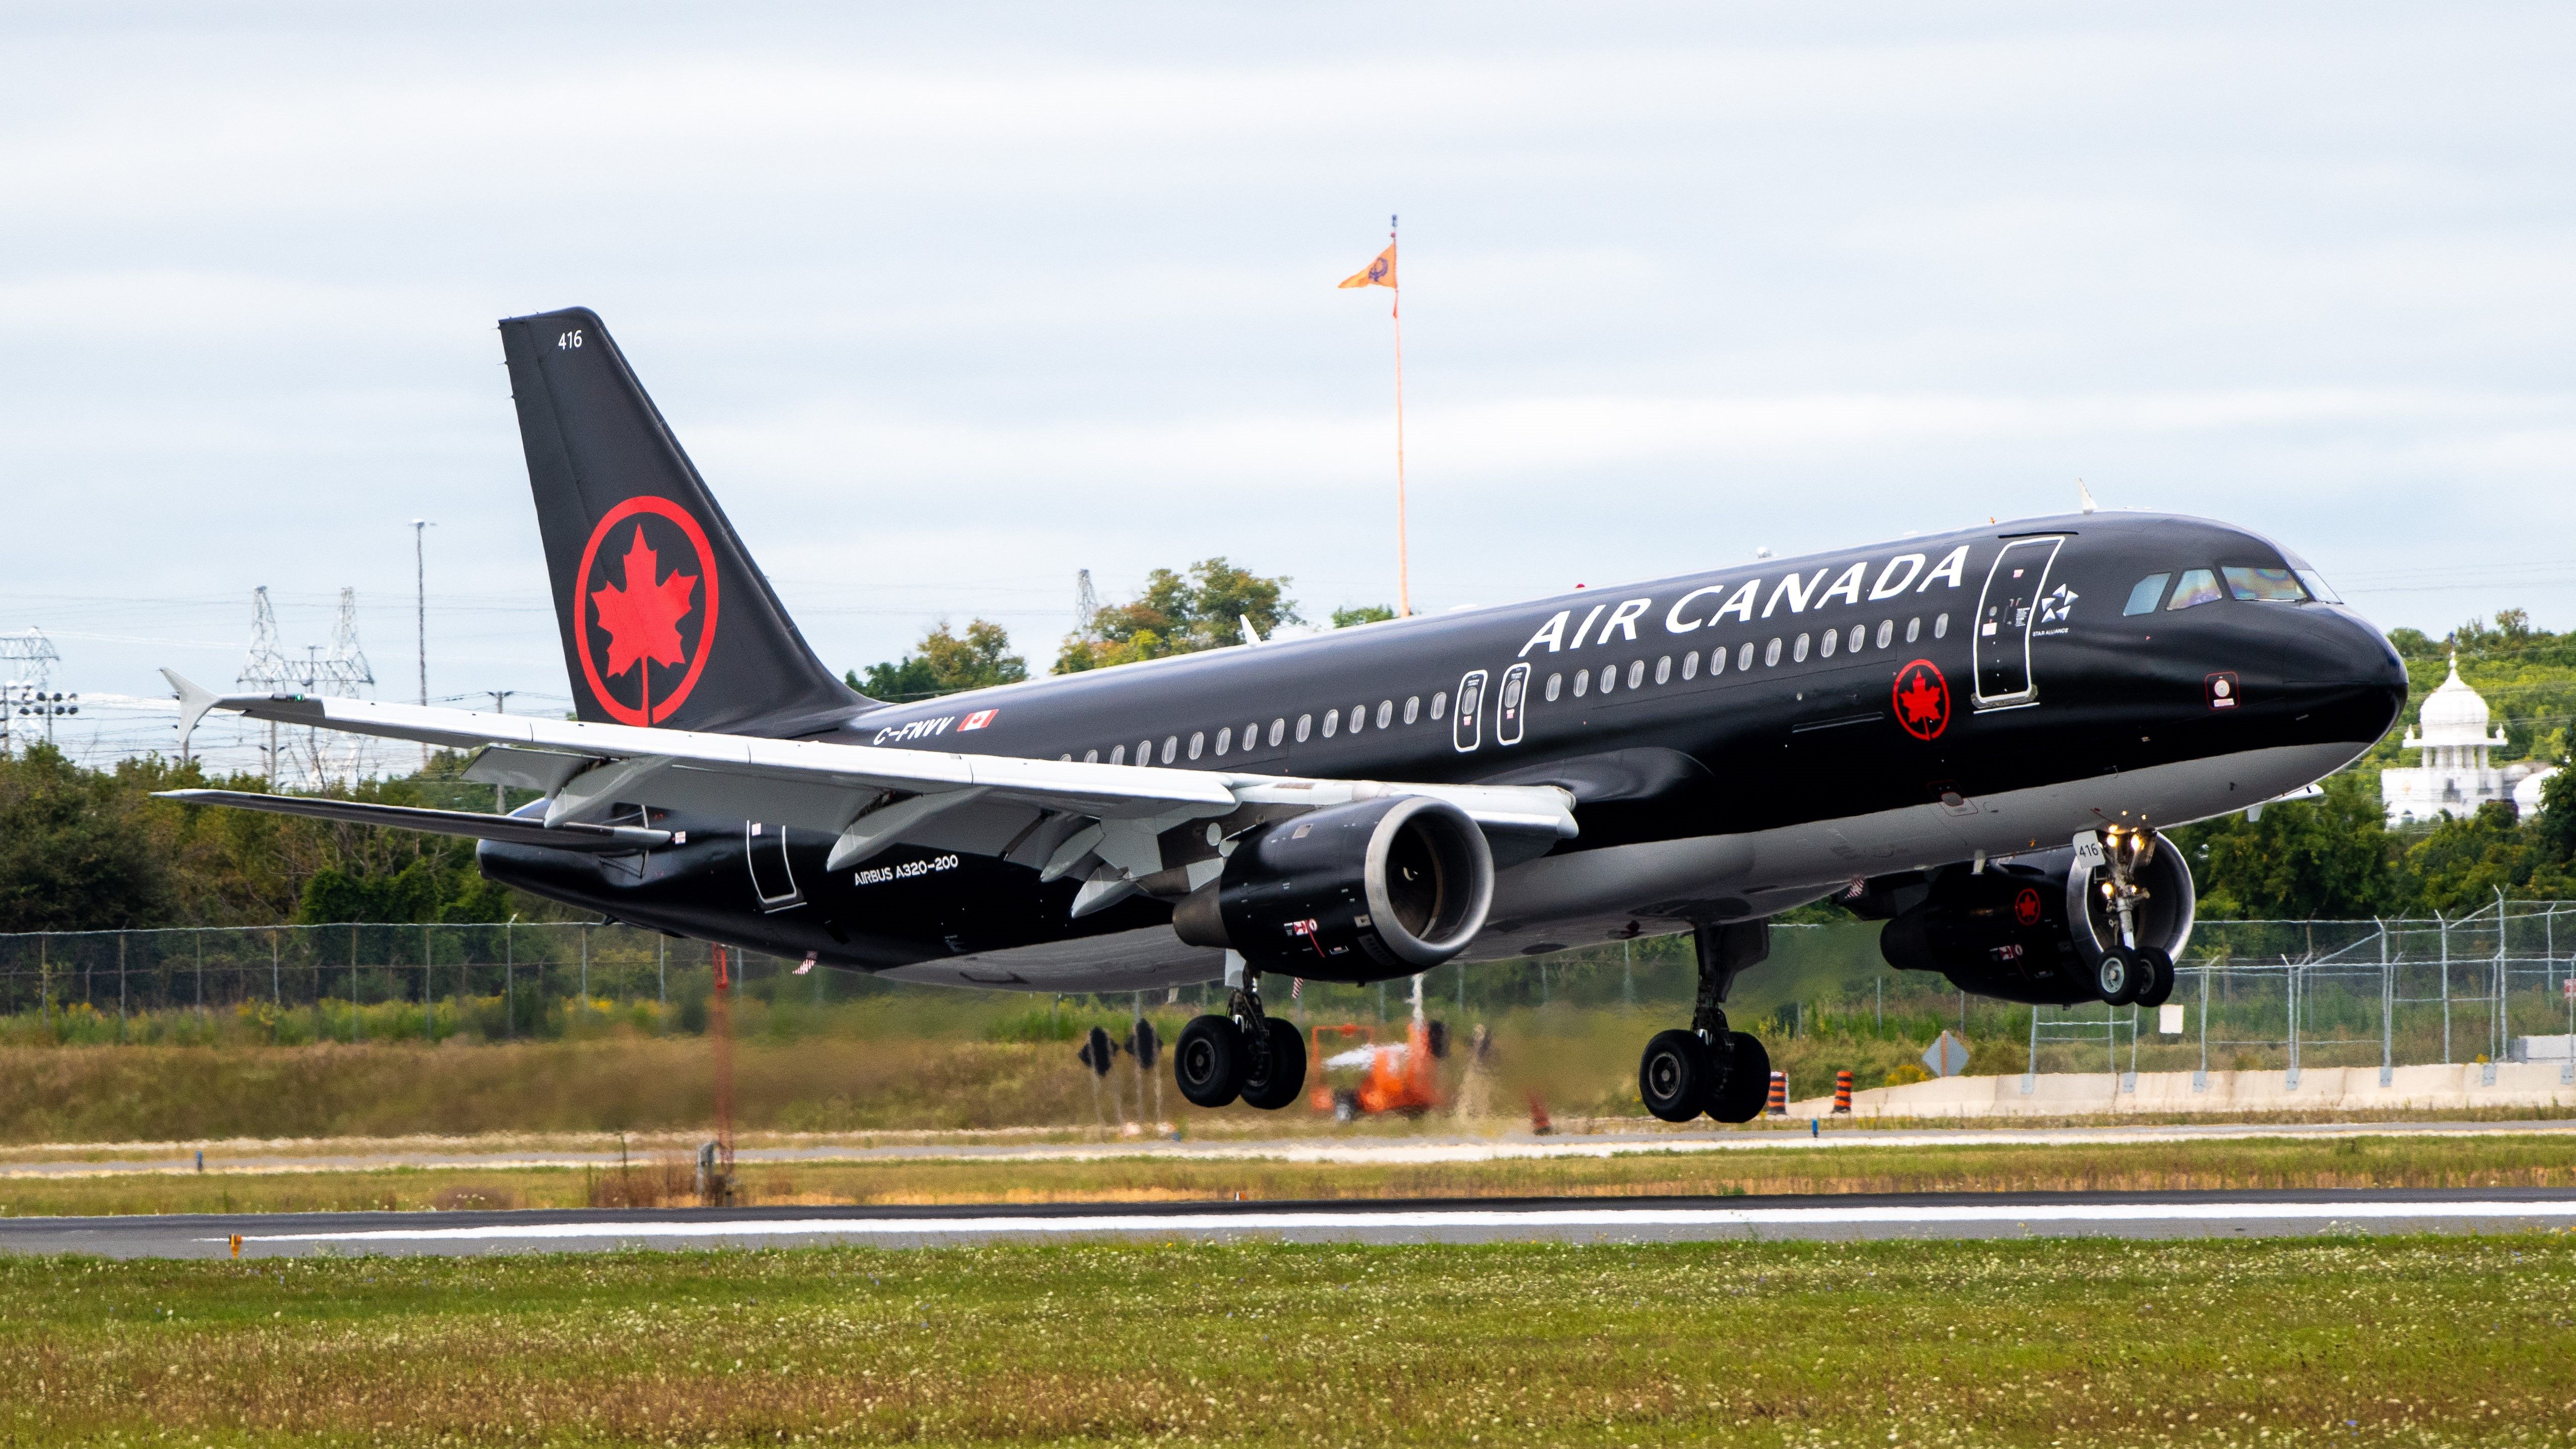 An Air Canada Jetz Airbus A320 about to land.